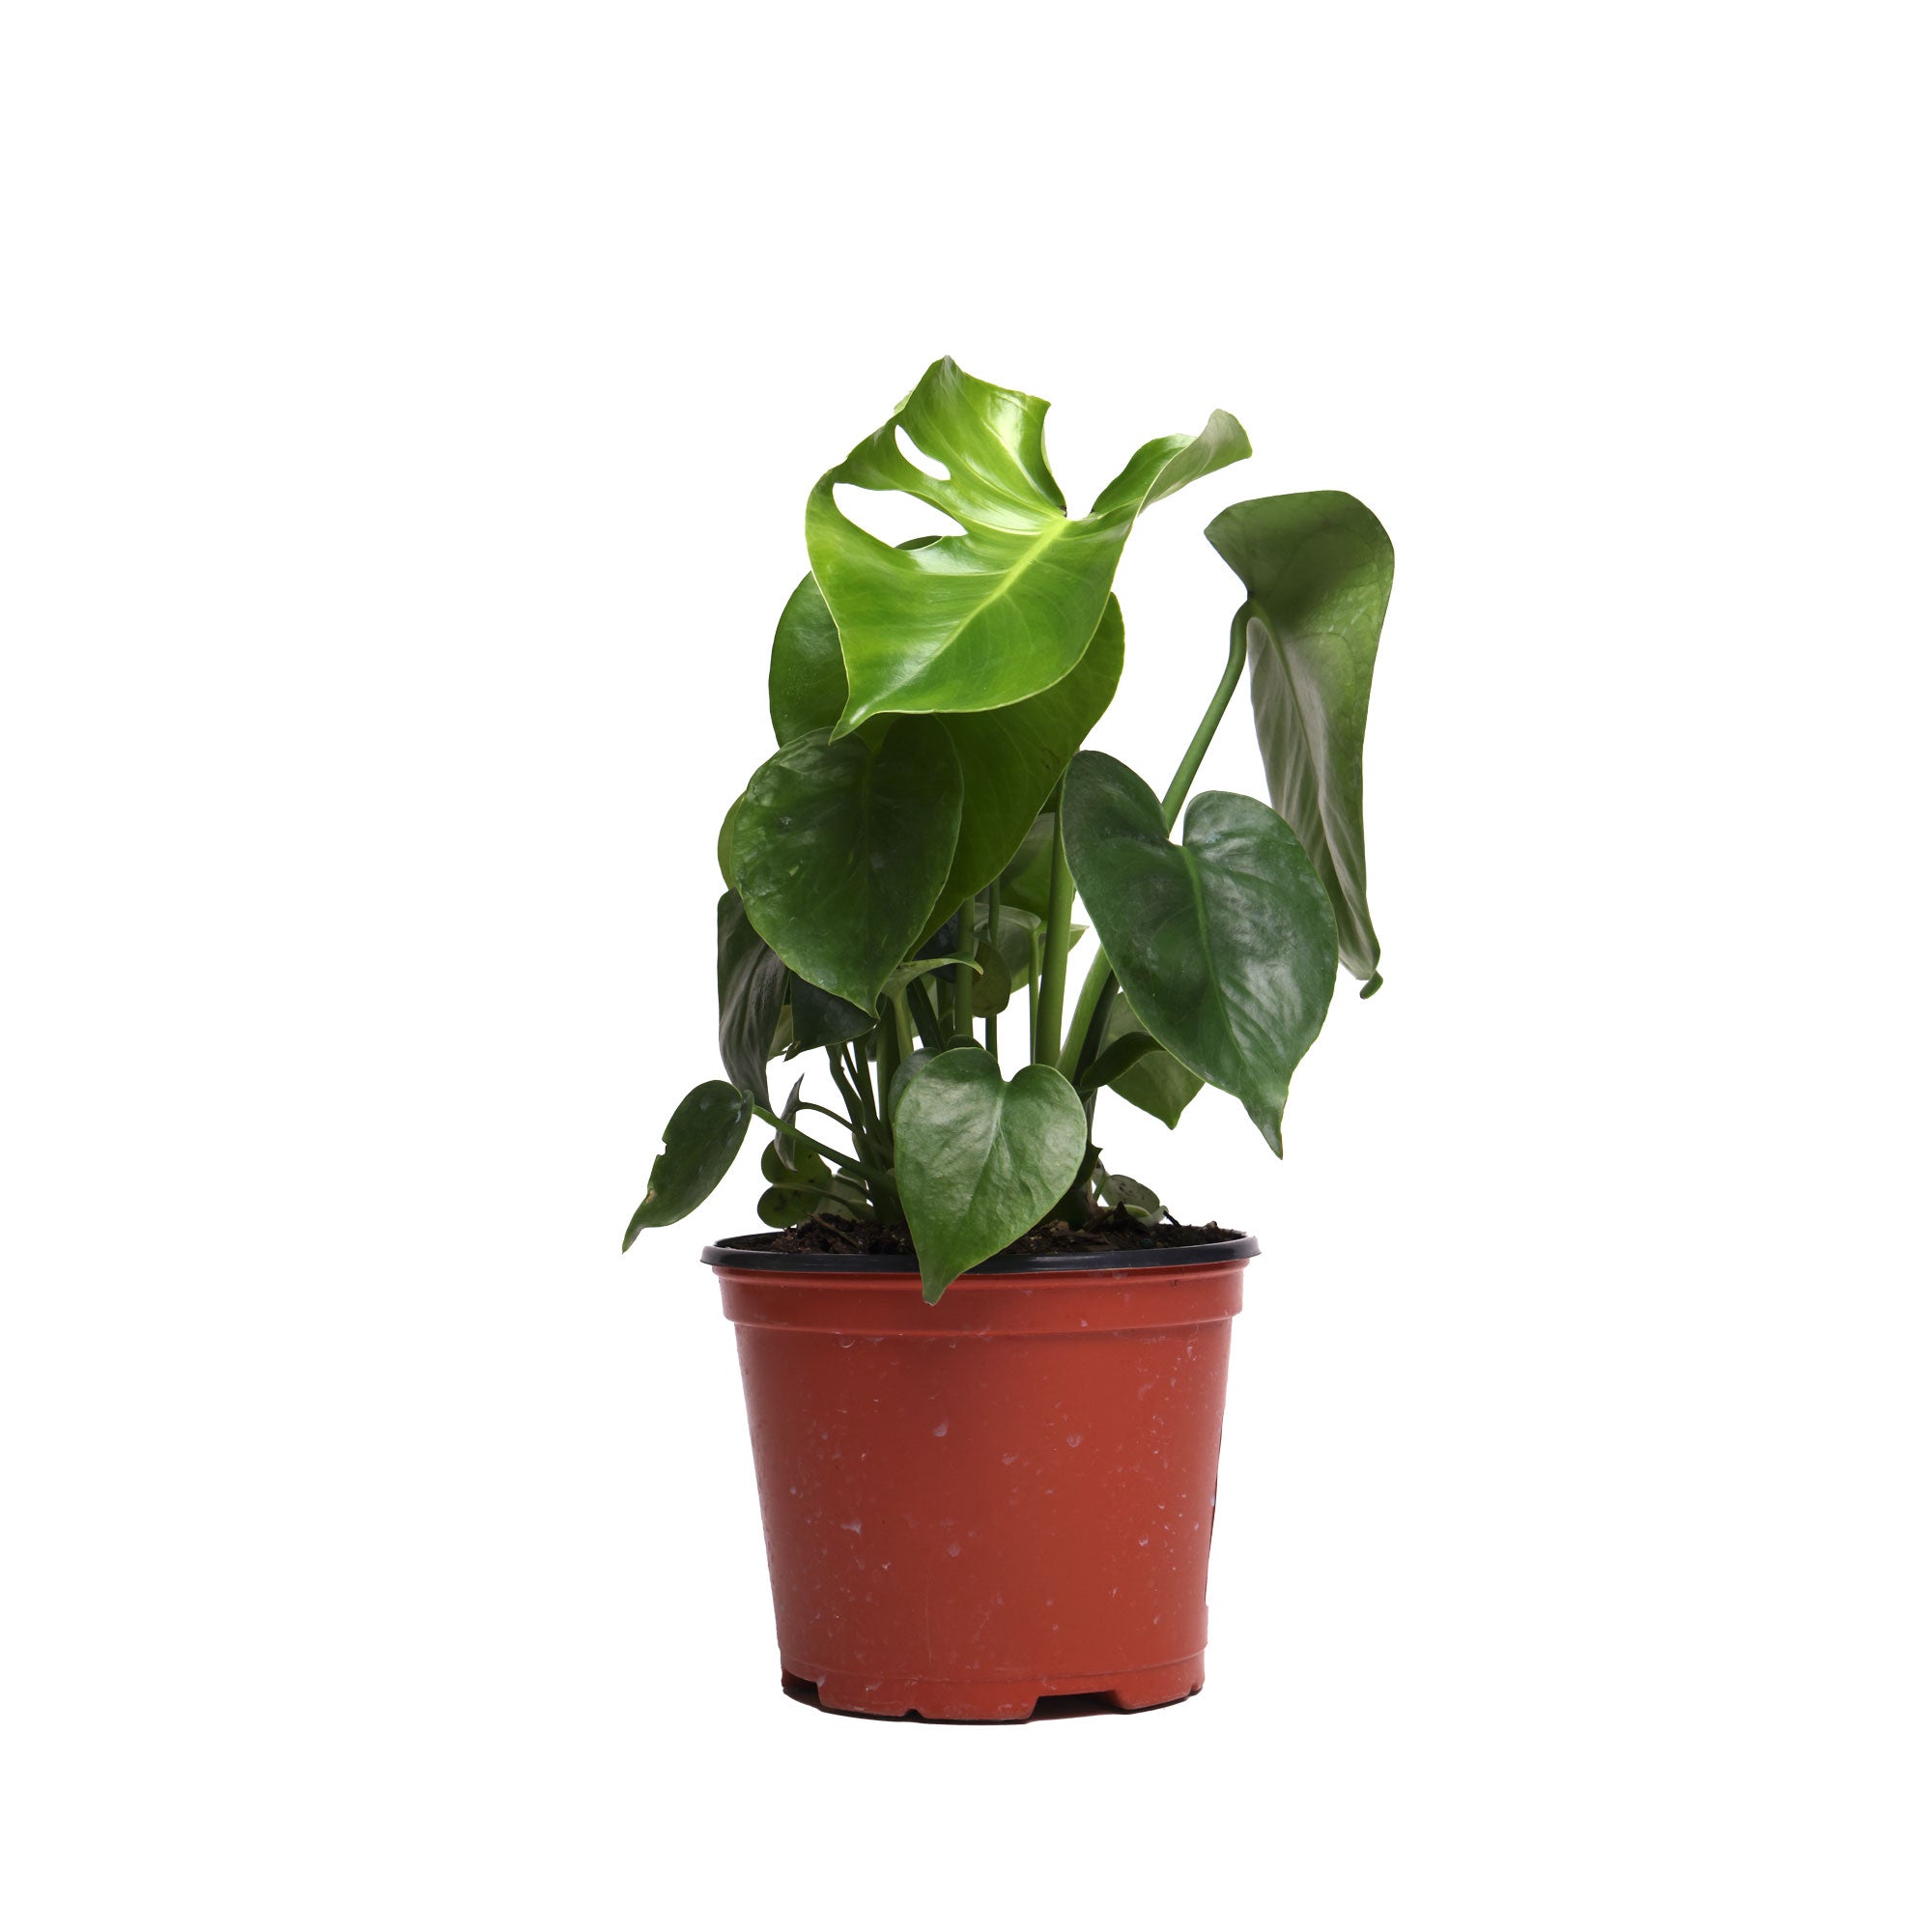 A small, vibrant green Monstera Deliciosa 6 Inch Pot from Chive Studio 2024 with characteristic split leaves is potted in a simple, reddish-brown plastic container. Perfect for indoor gardening enthusiasts, the healthy and lush houseplant stands against a plain white background.